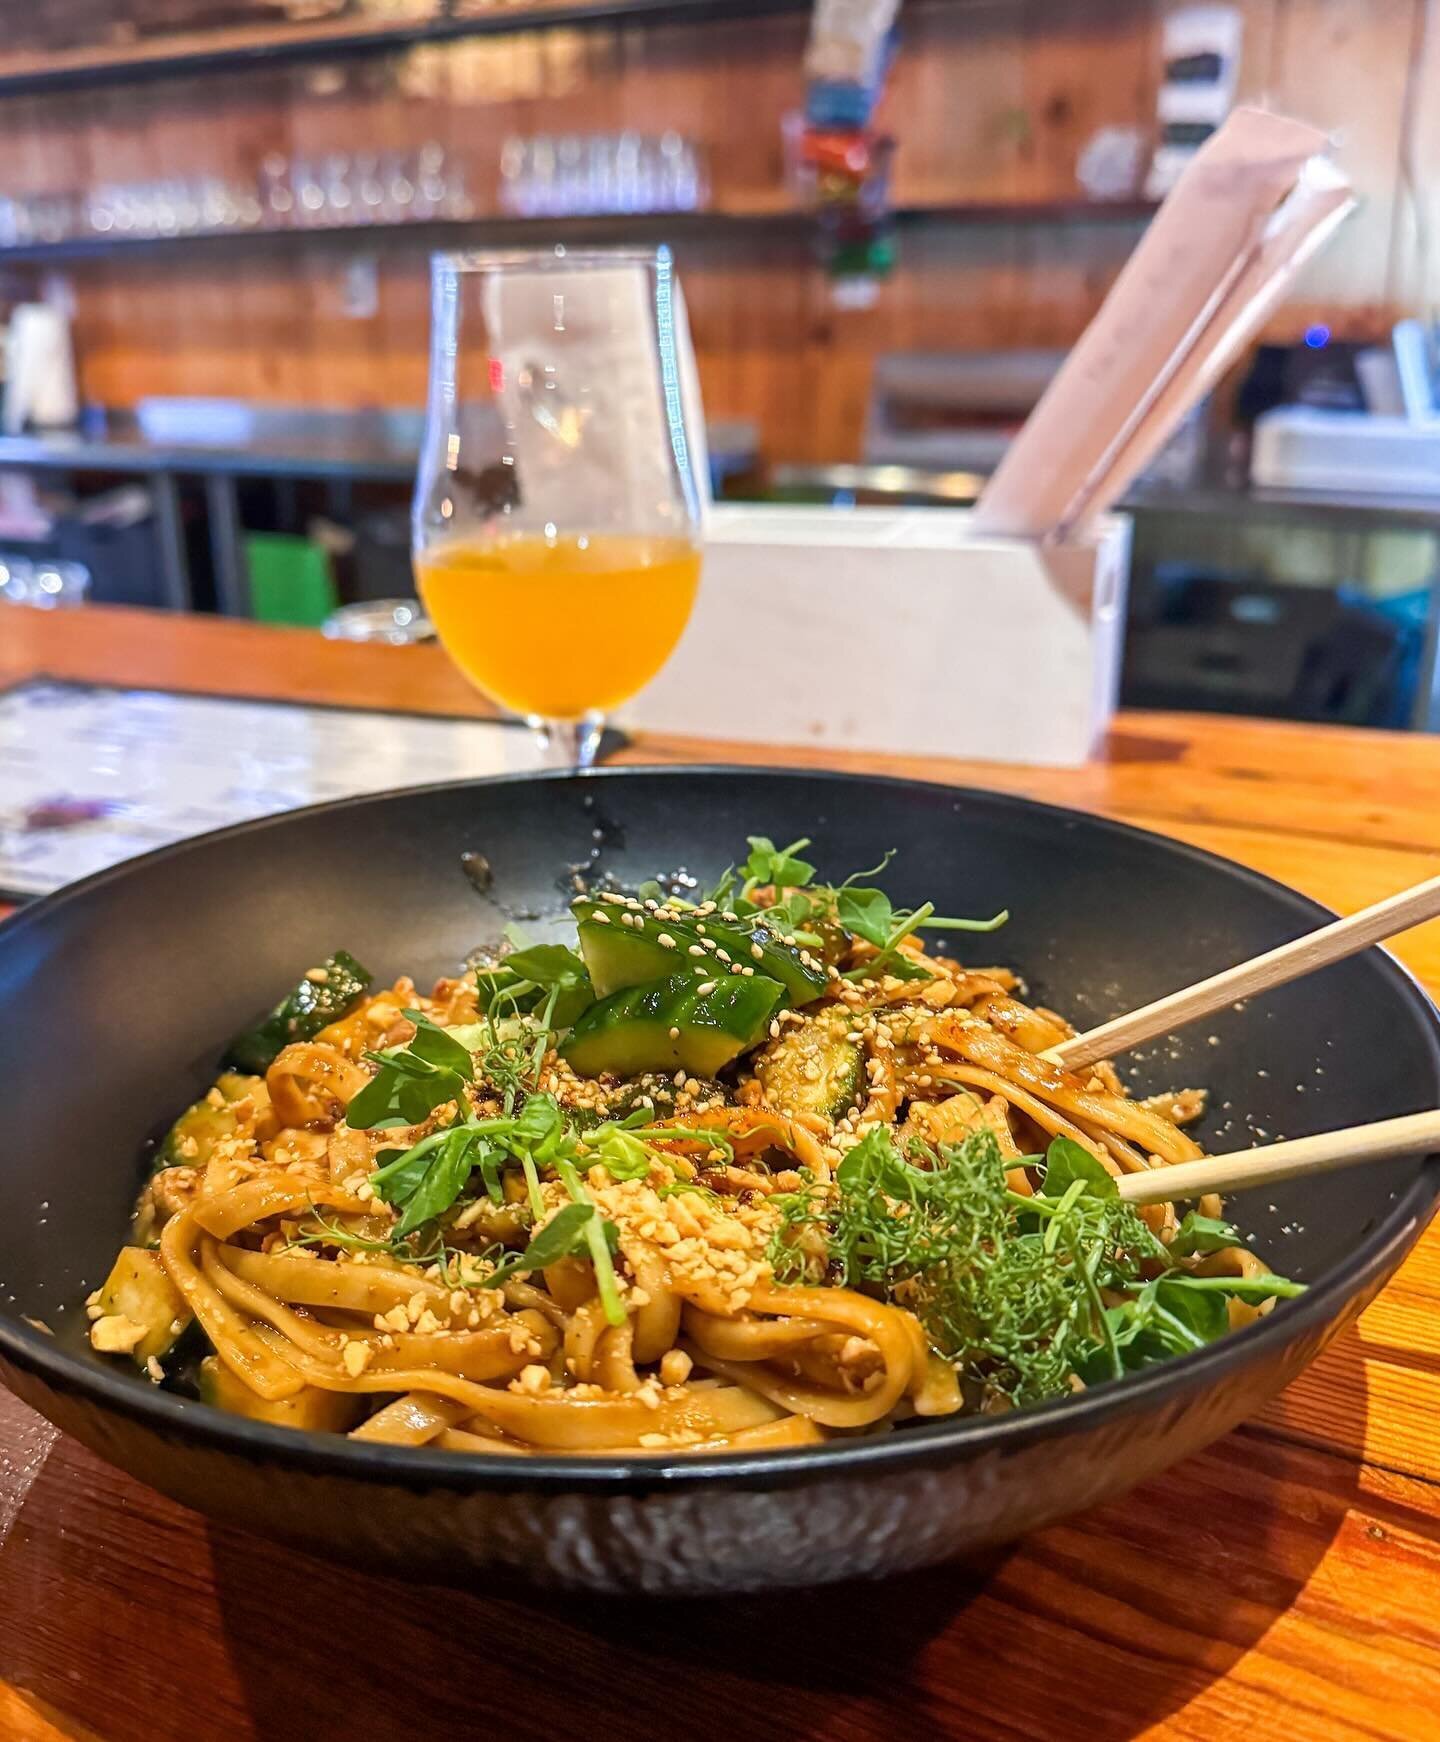 What&rsquo;s for Dinner: Dan Dan Noodles with Chicken from @bokchoyboyfood at @chsfermentory. If you haven&rsquo;t been to the Avondale area of West Ashley recently, it&rsquo;s worth the visit again soon &ndash; lots of really fun concepts opening up